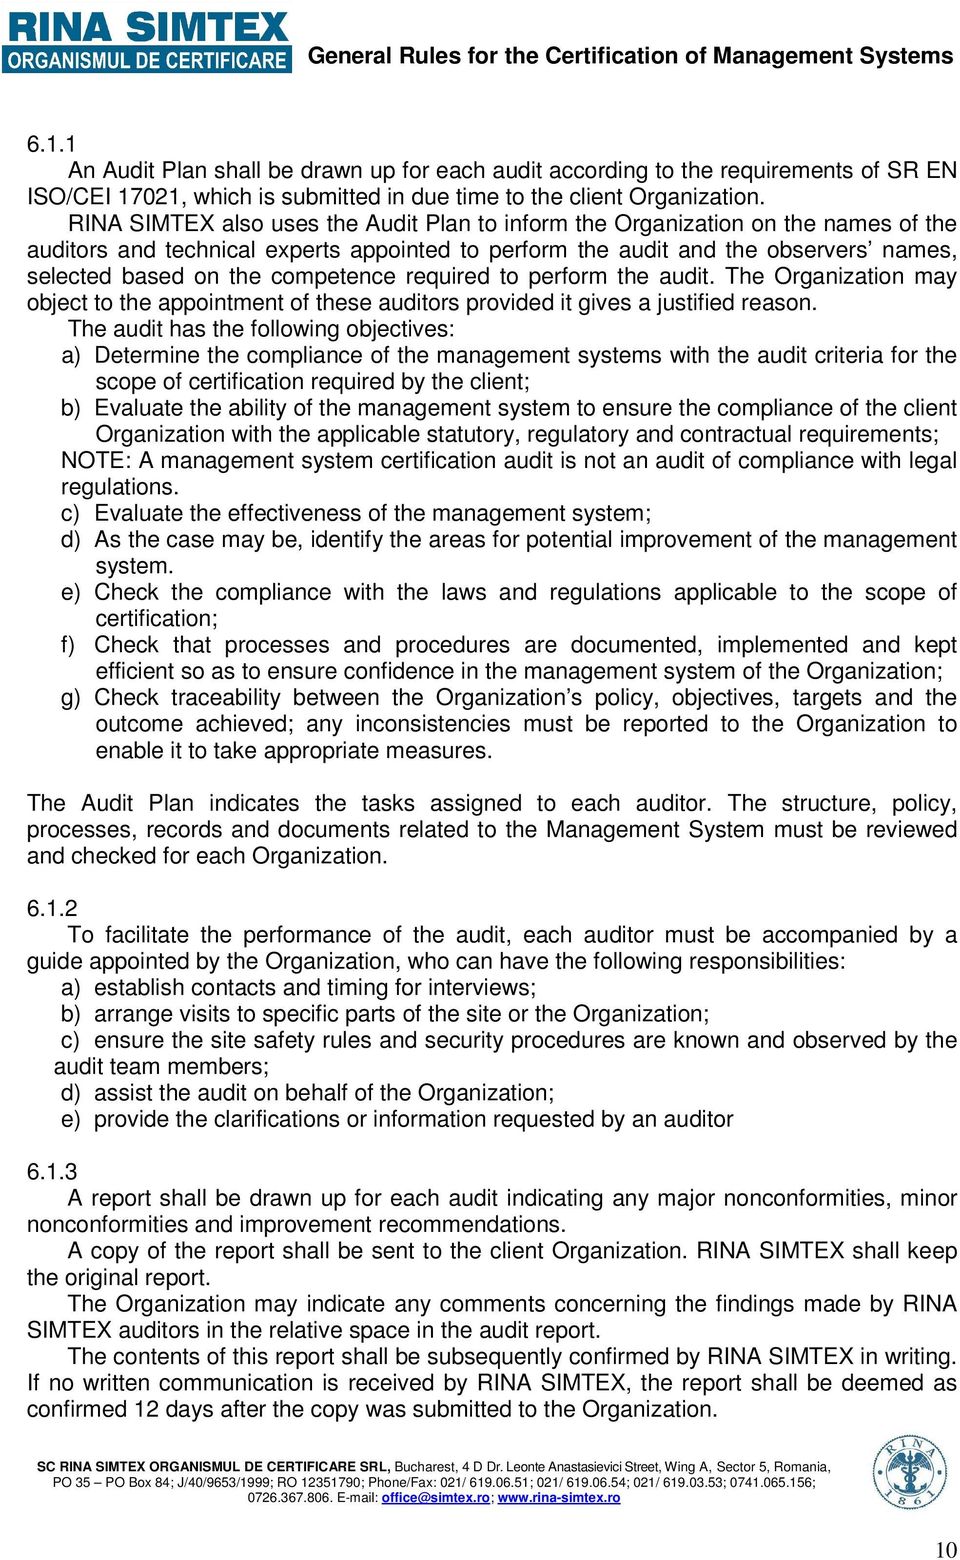 competence required to perform the audit. The Organization may object to the appointment of these auditors provided it gives a justified reason.